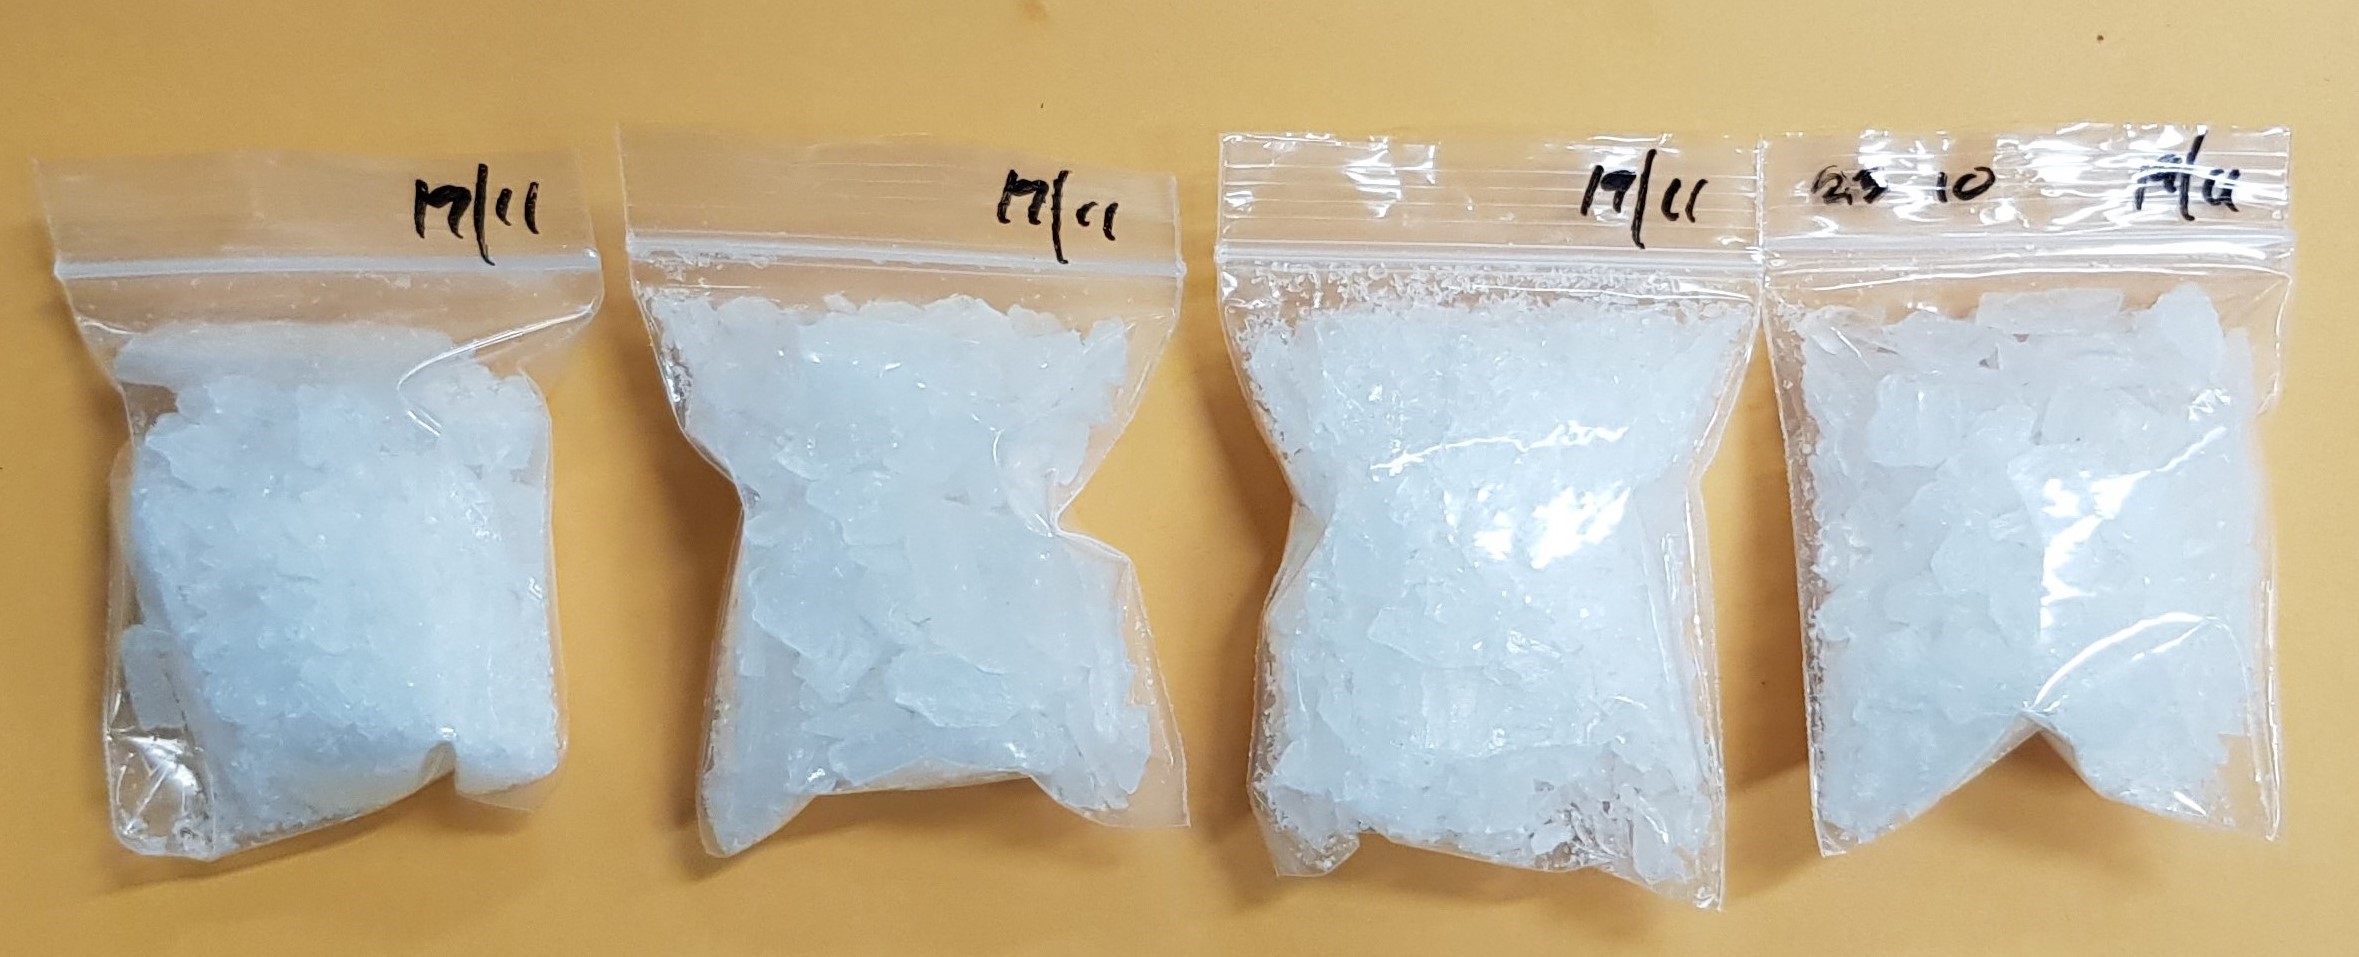 Photo-1 (CNB):  ‘Ice’ seized in CNB raid on a unit in the vicinity of Yishun Avenue 11 on 20 November 2019.